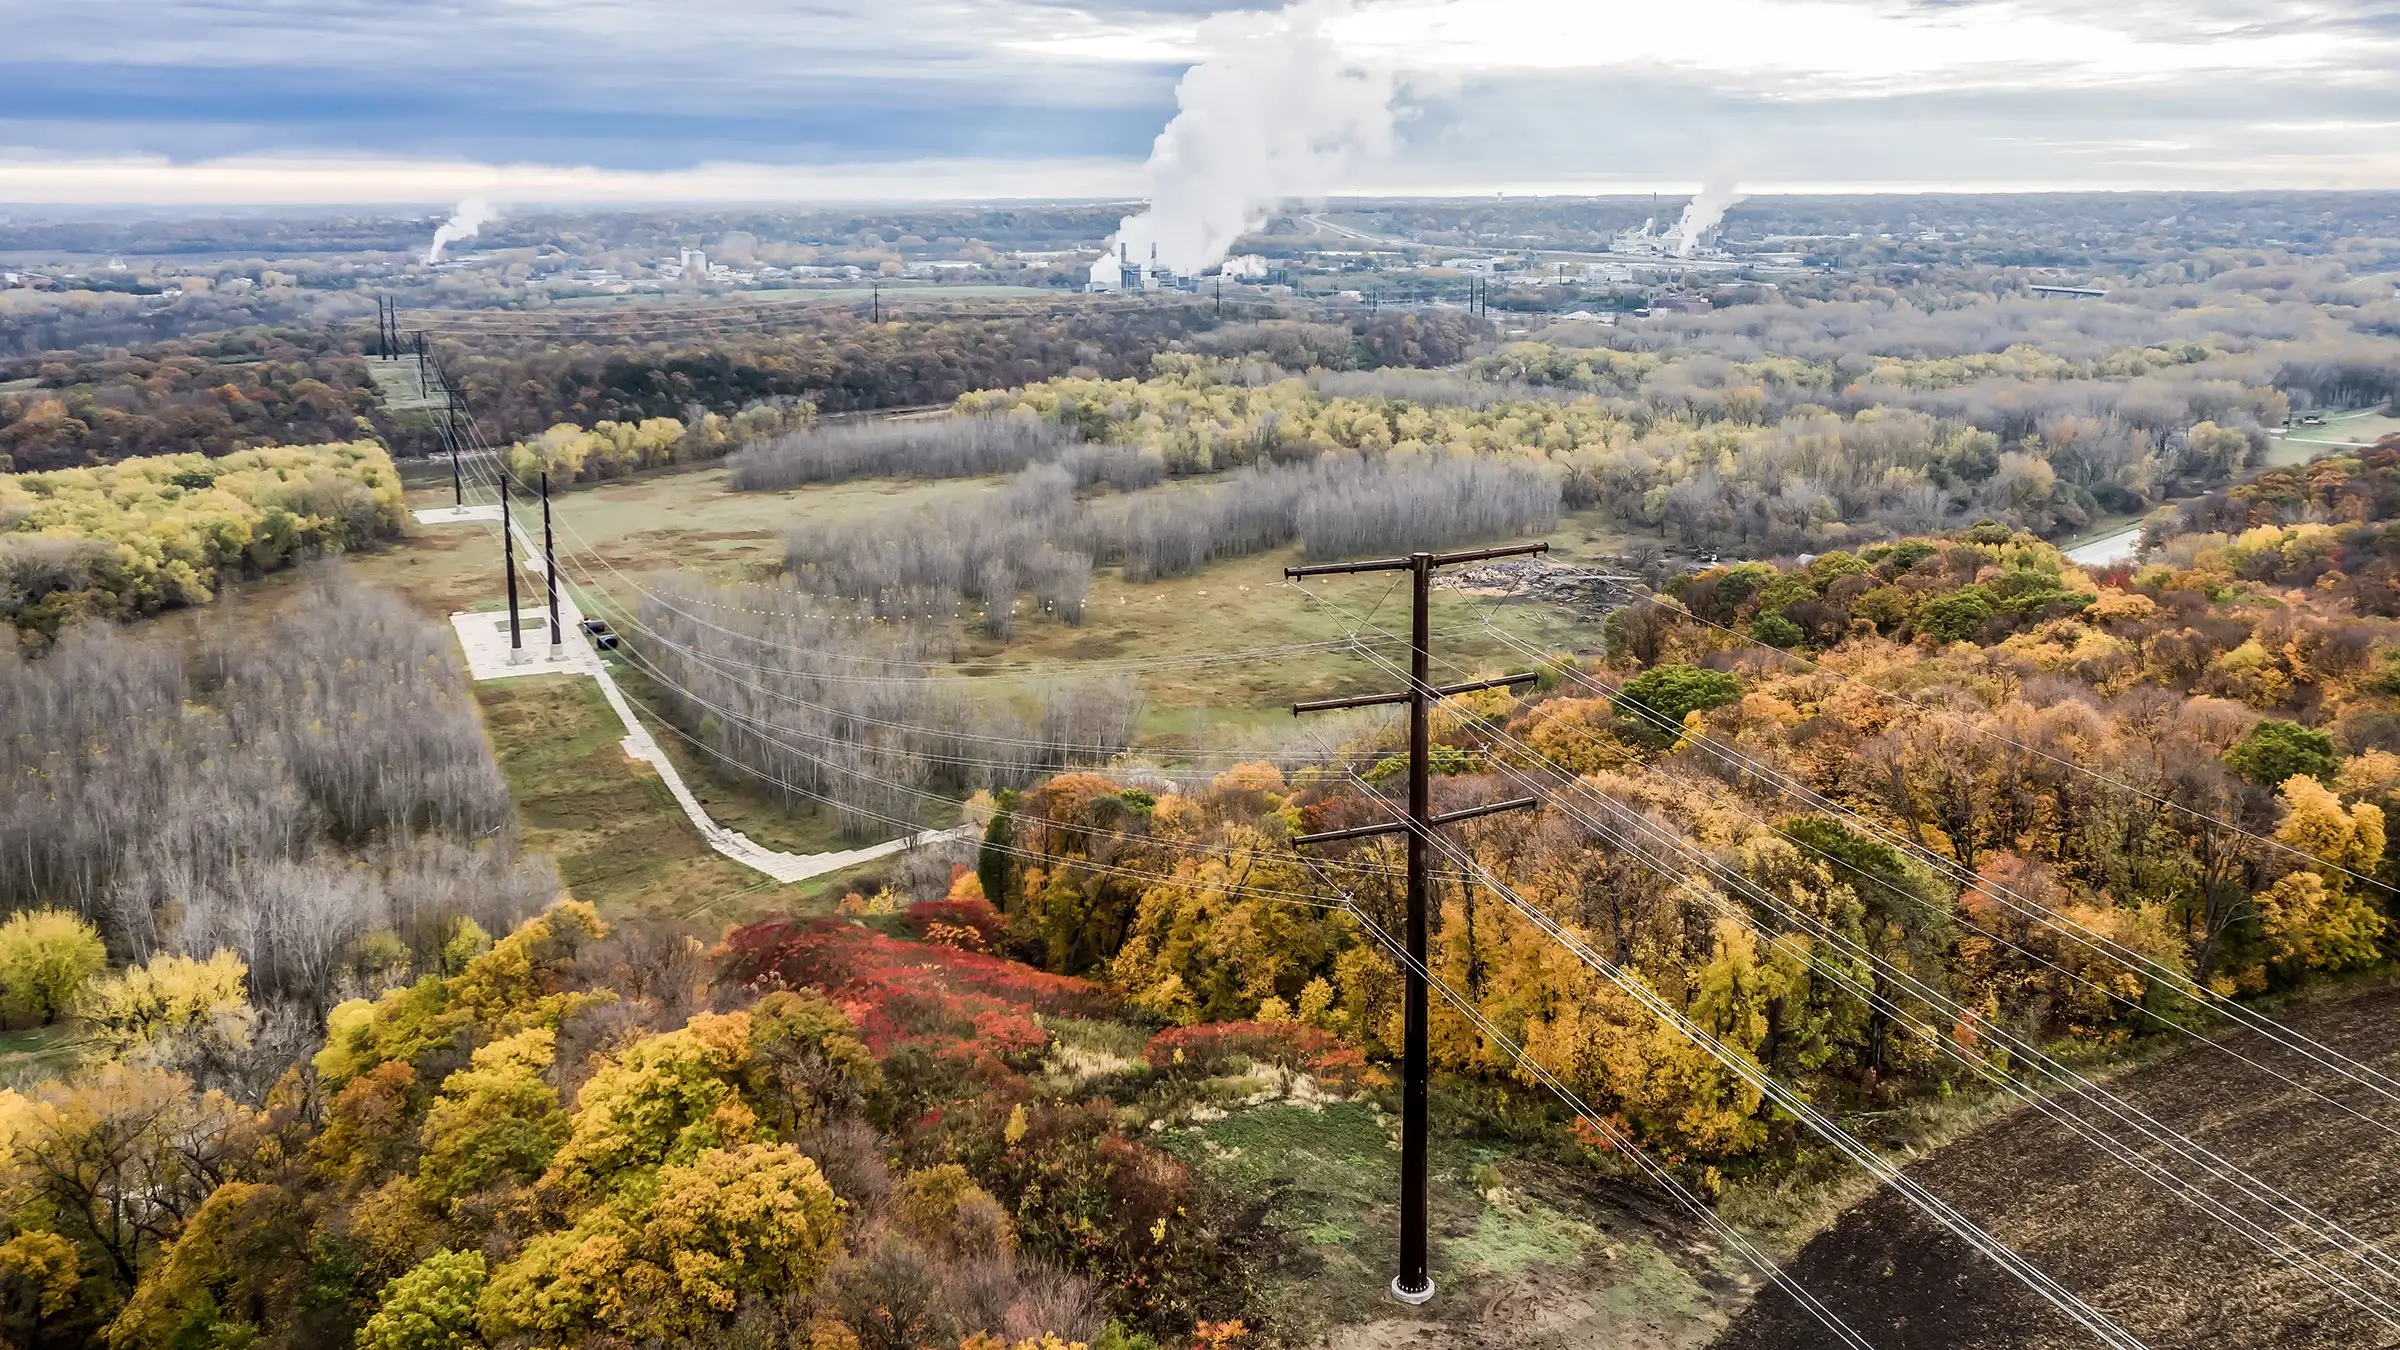 Main power line featured against a hillside with leaves changing colors for fall